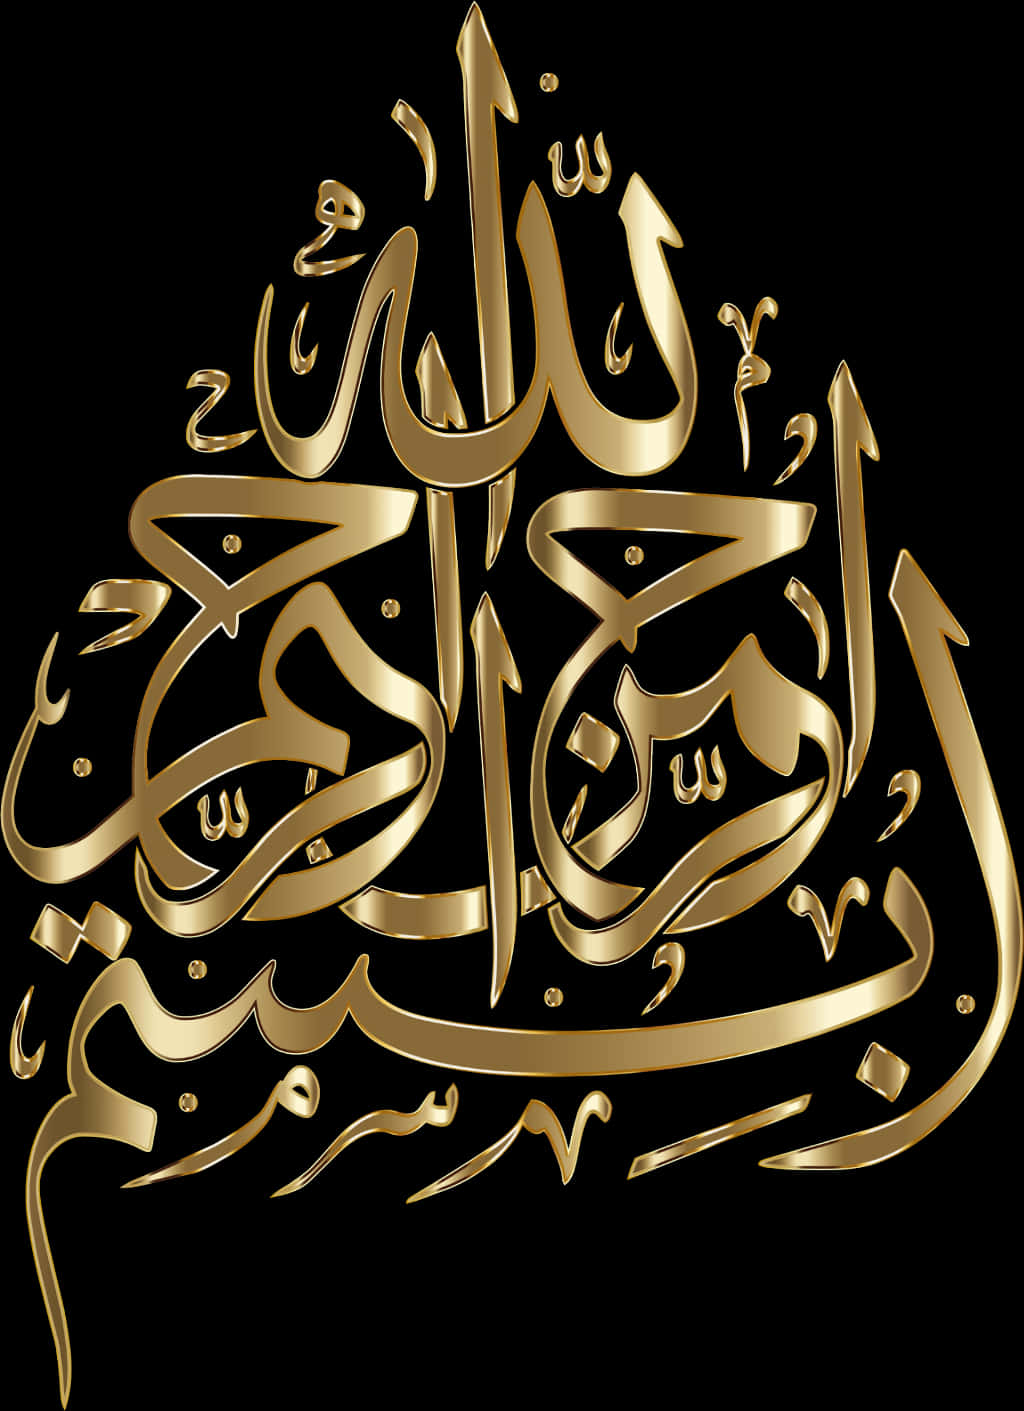 A Gold And Black Background With Arabic Writing